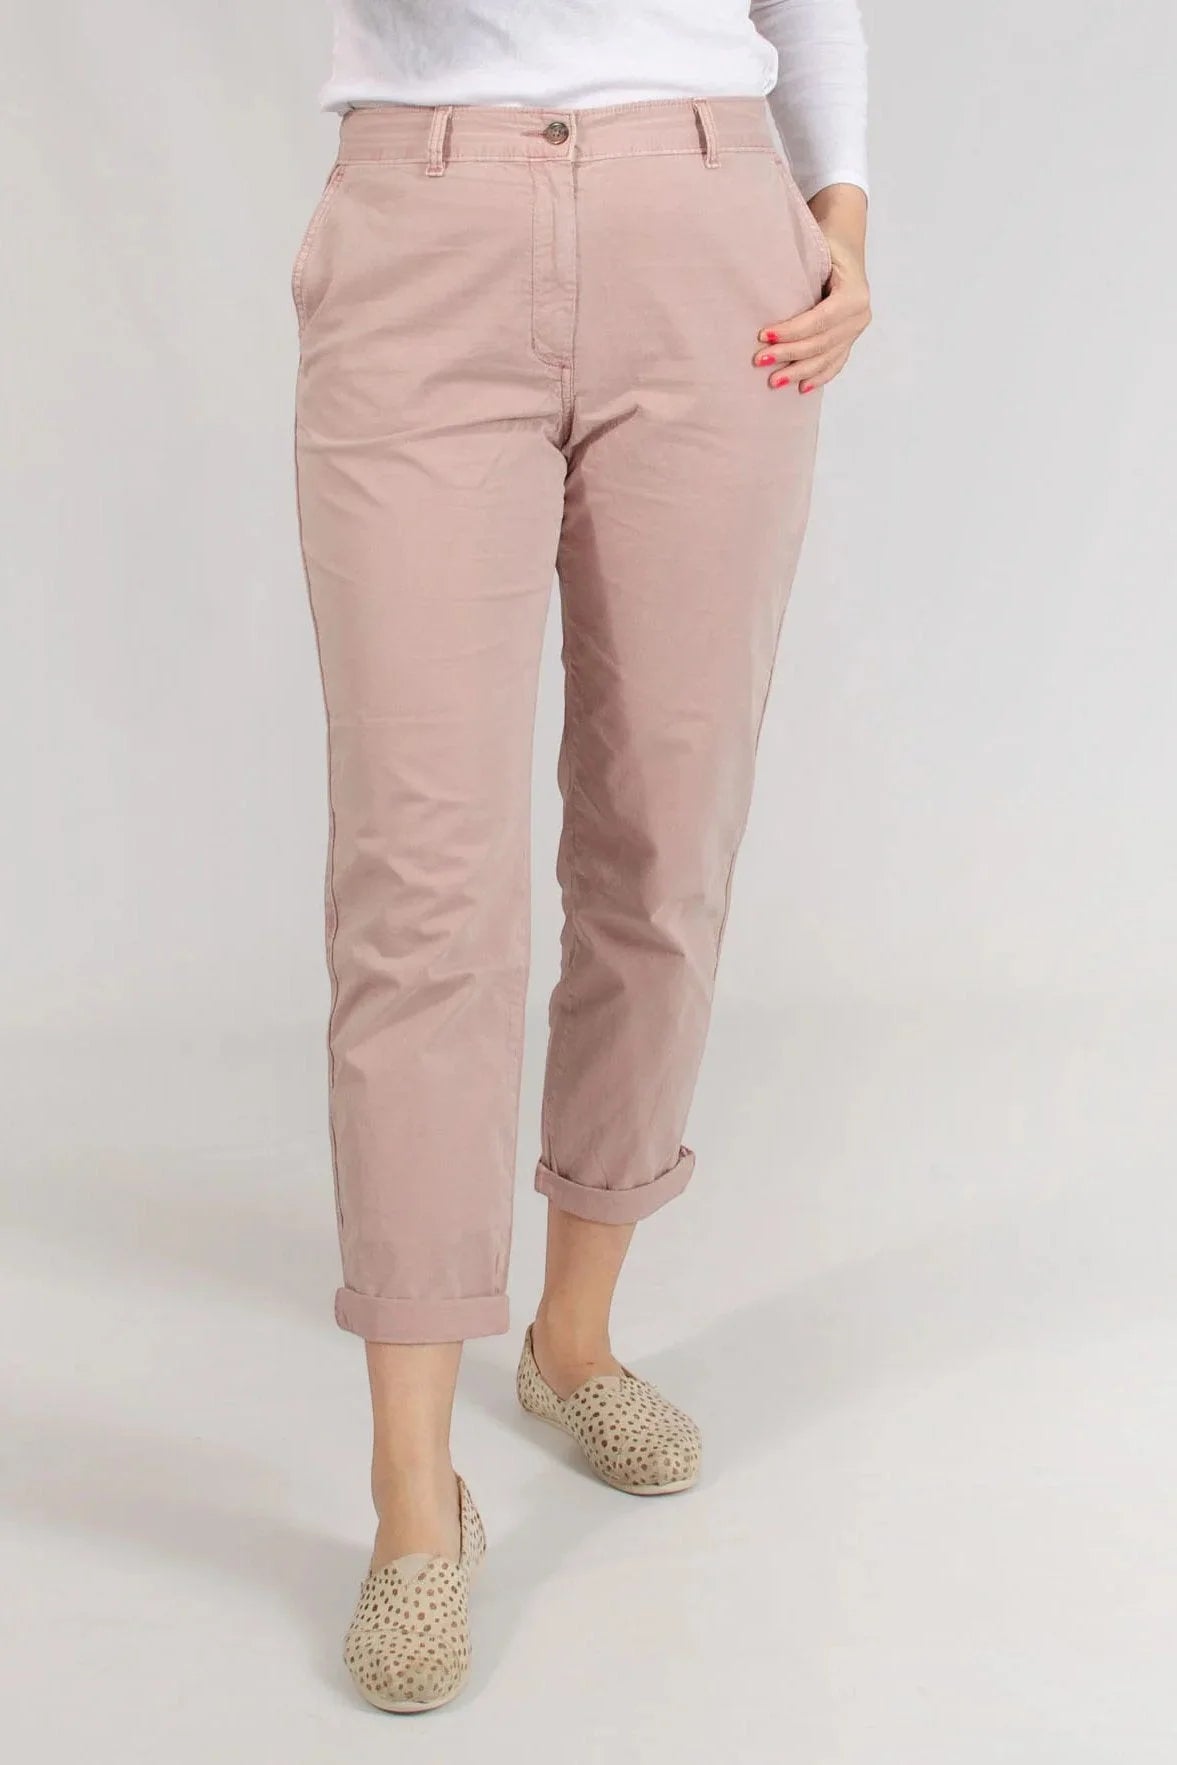 M&S Ankle Grazer Chino Trousers Dusky Pink / 8 / Reg